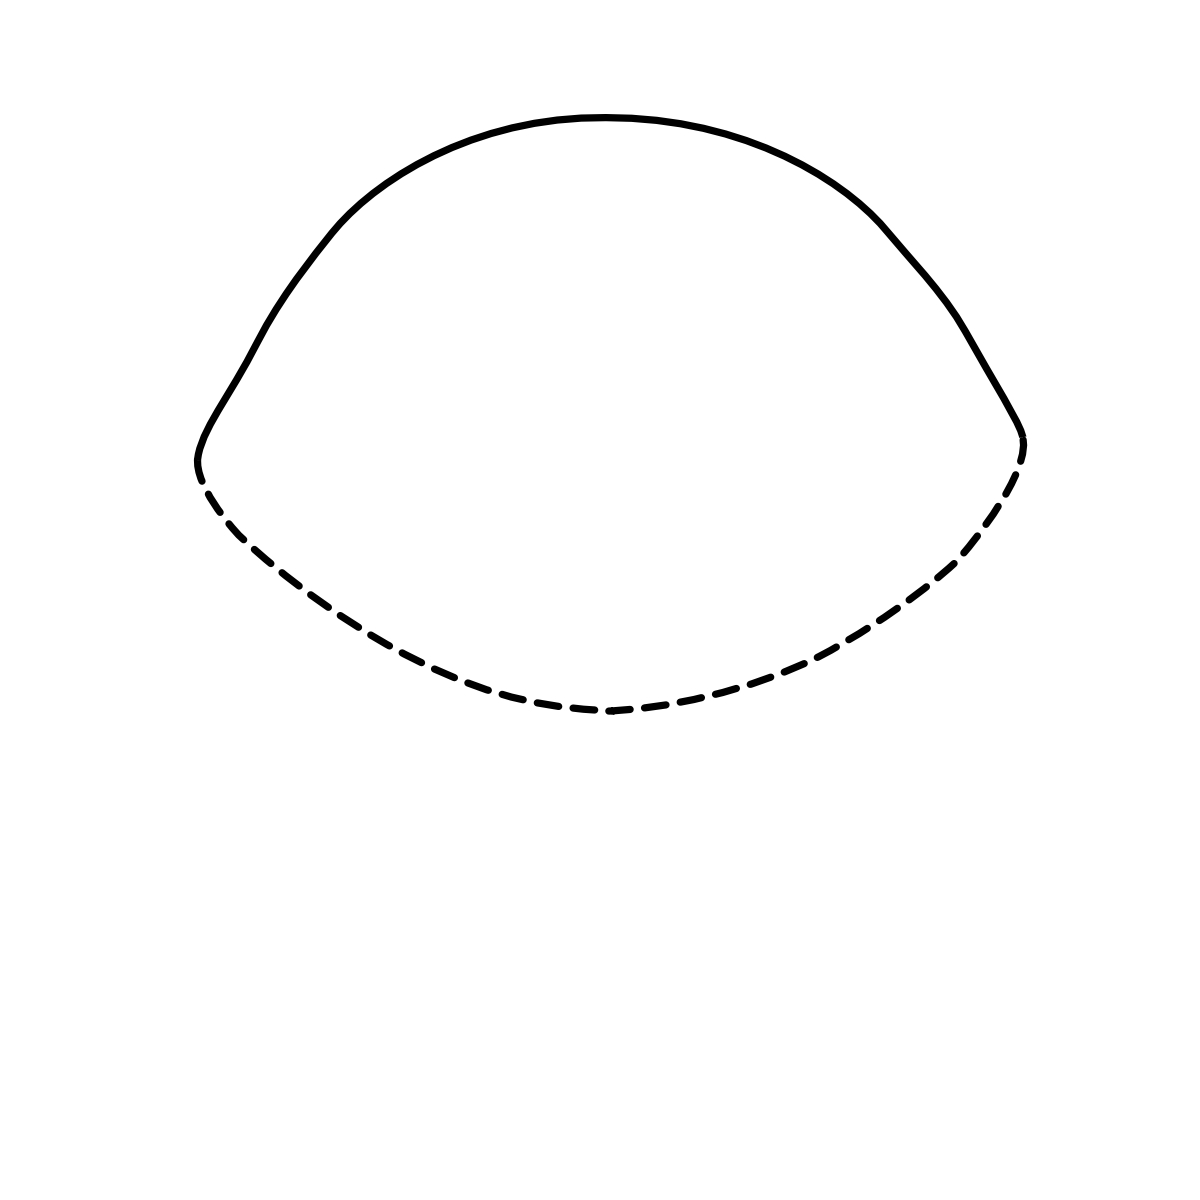 dotted line showing how to draw the bottom of the head